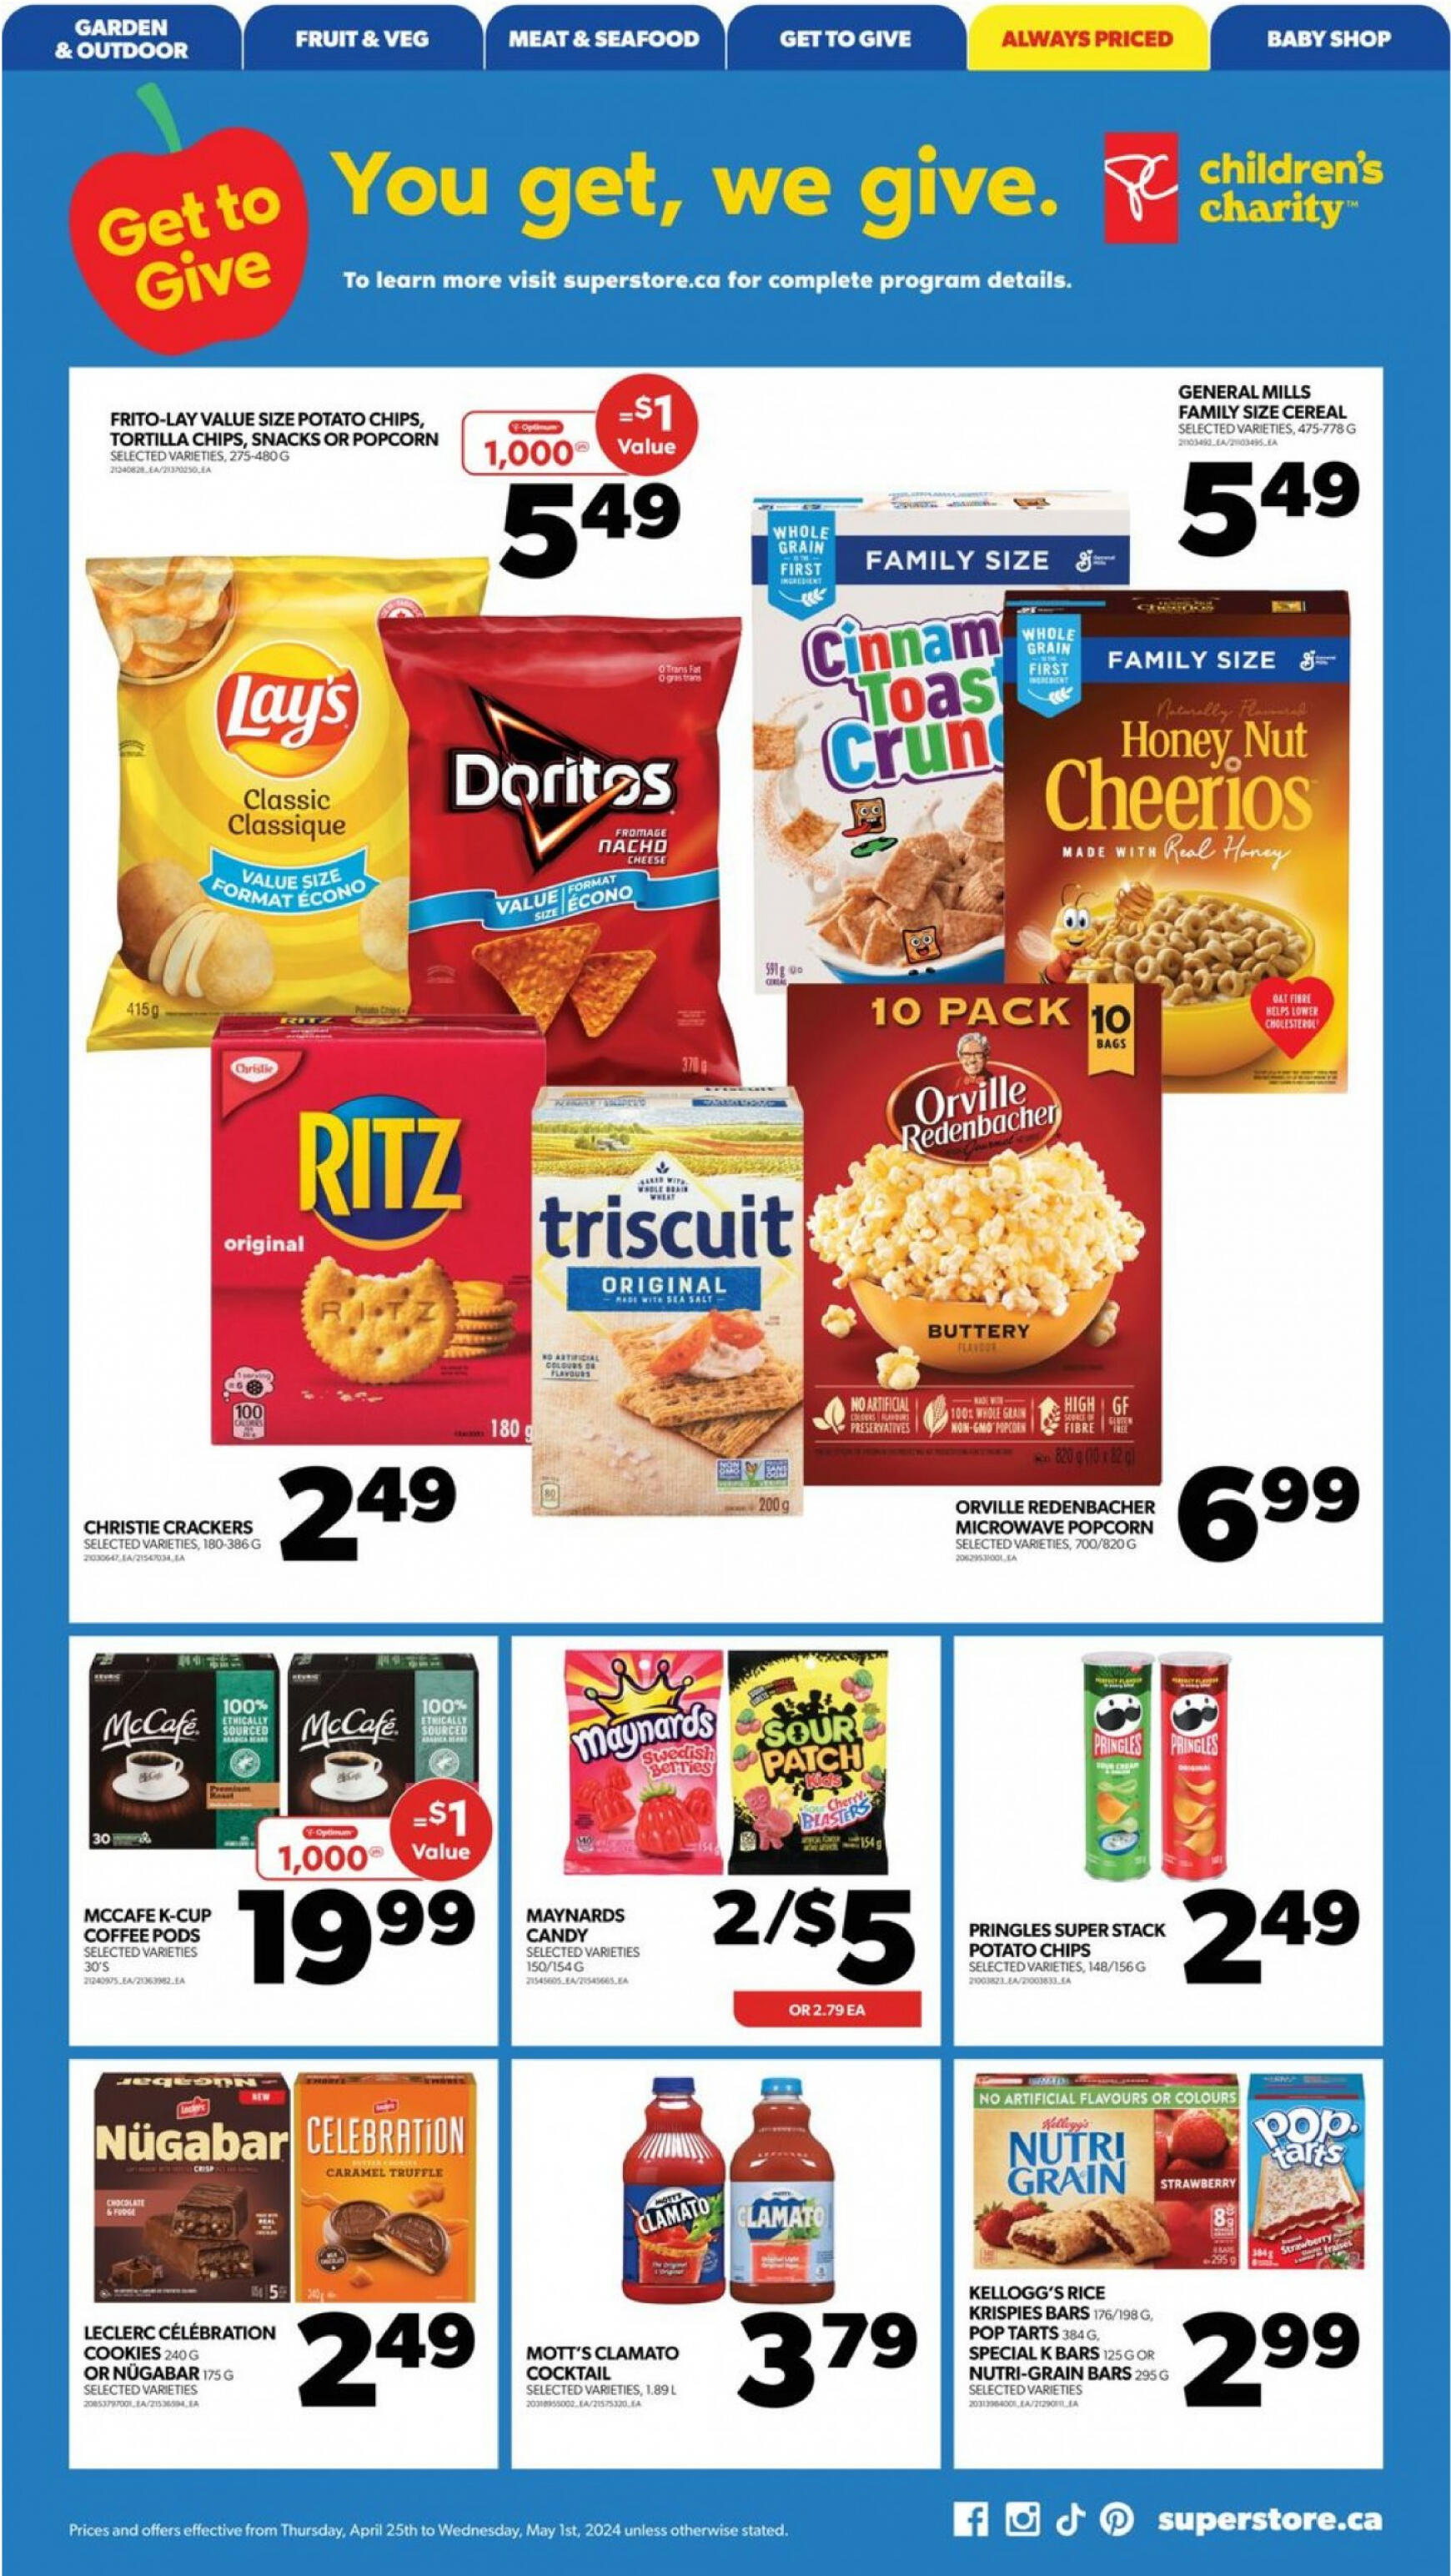 real-canadian-superstore - Real Canadian Superstore flyer current 01.05. - 31.05. - page: 13